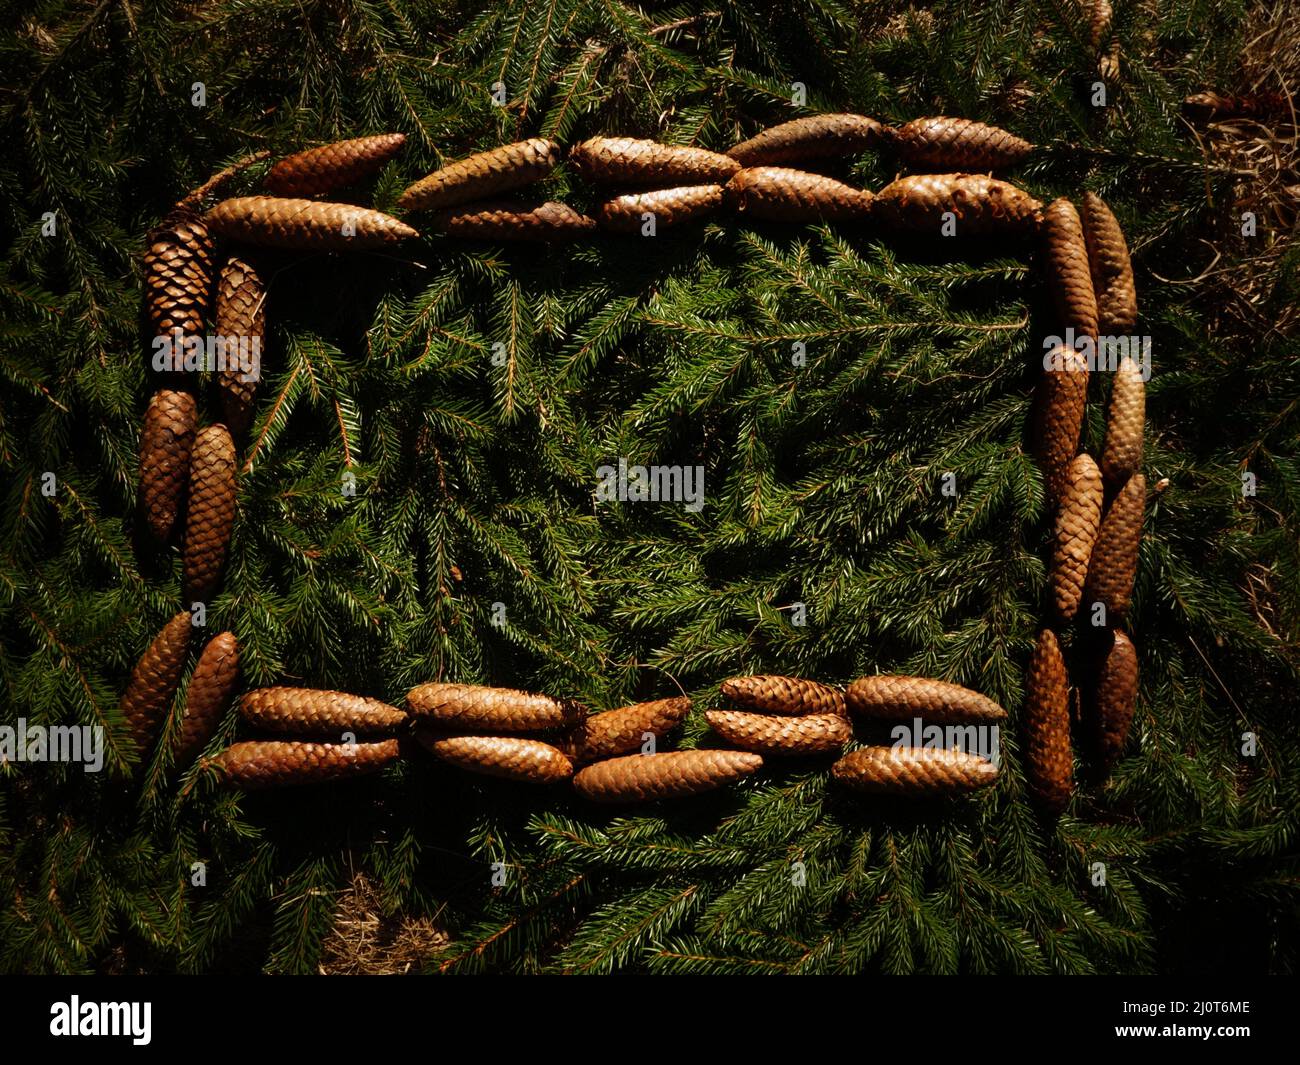 Decorative frame of spruce cones on fir branches or spruce sprigs suitable as background for adding text for a christmas card, a natural sign, message Stock Photo